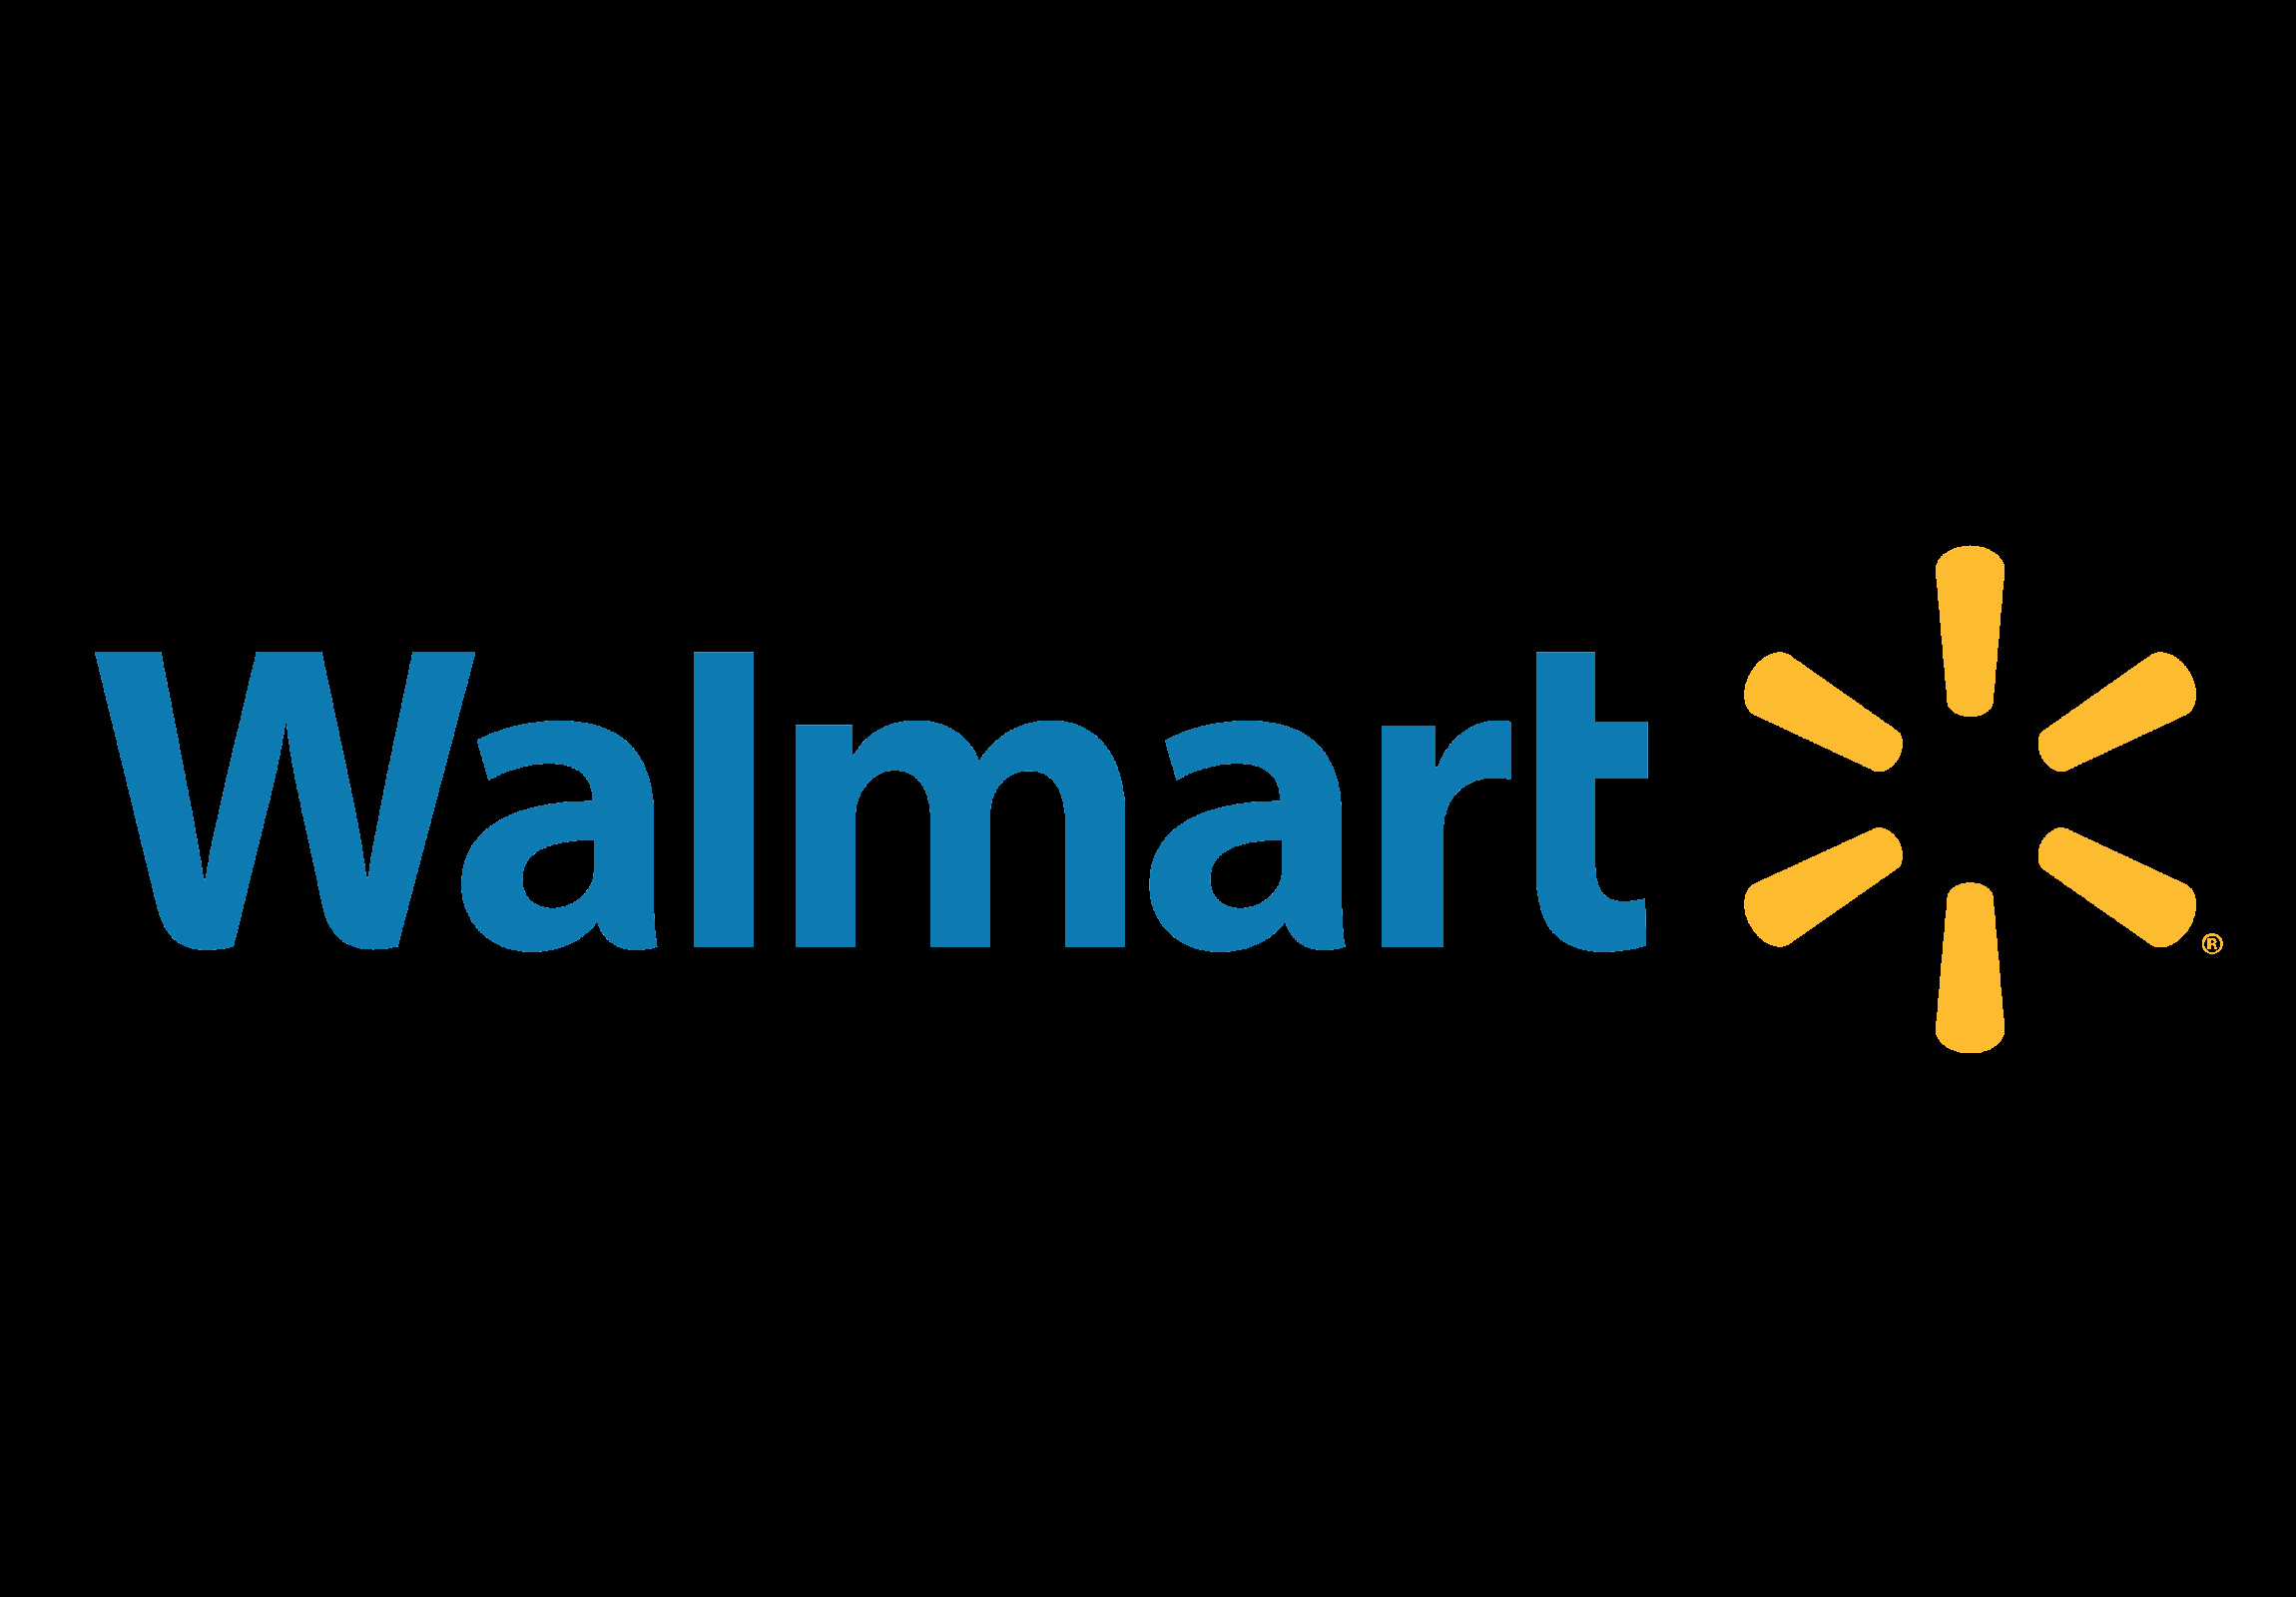 Meaning Walmart logo and symbol | history and evolution2300 x 1600